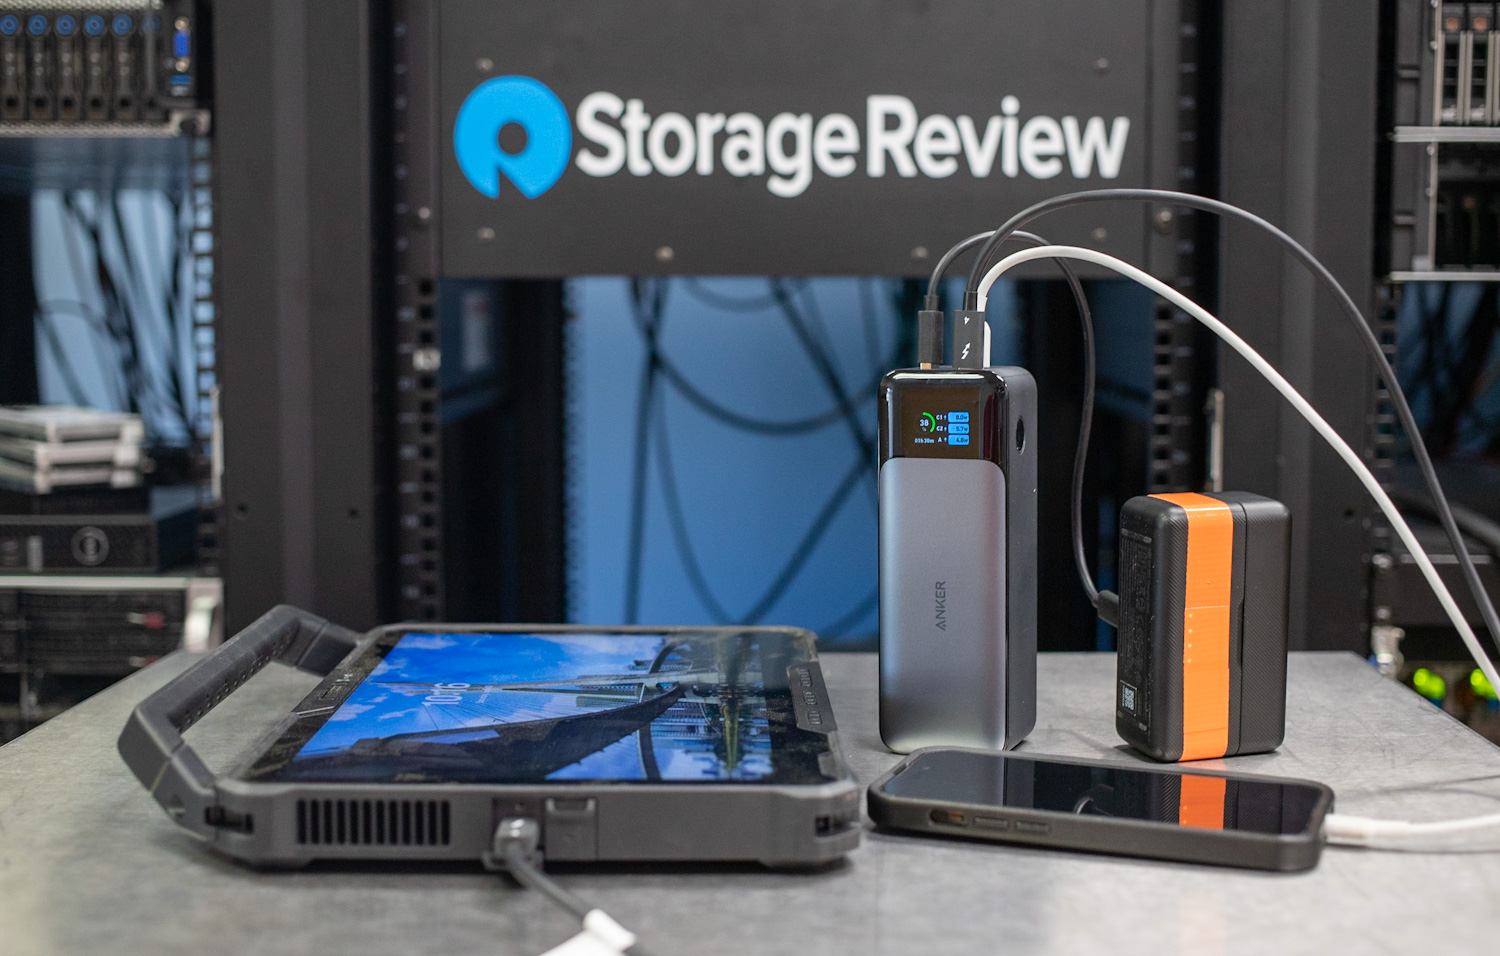 Anker 737 Power Bank Review - StorageReview.com